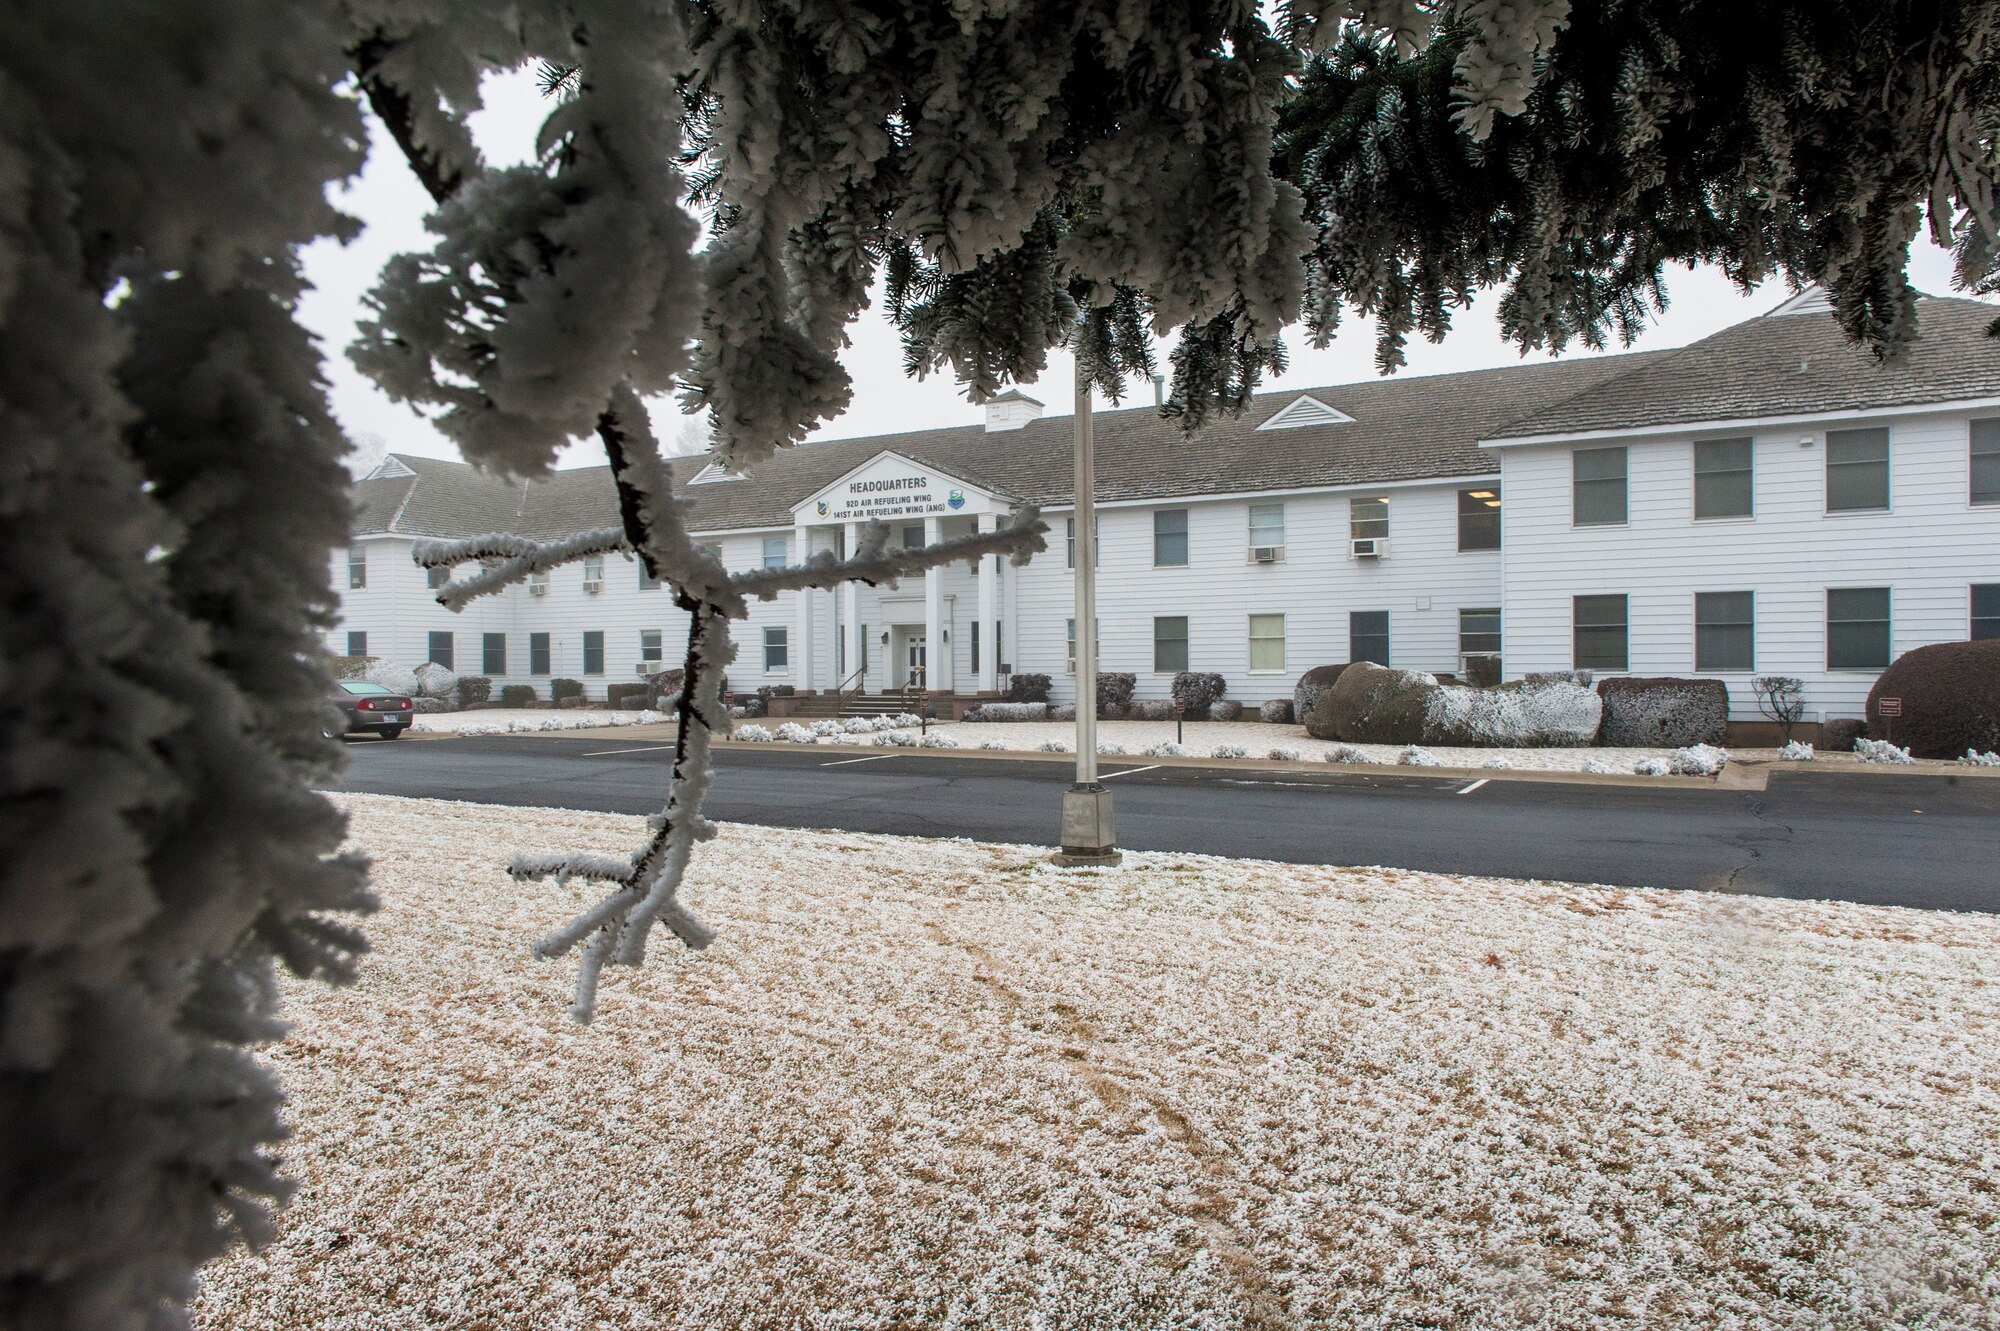 Winter weather has taken on a new meaning at Fairchild Air Force Base, Wash., with random ice storms and thick fog leading the way to air stagnation and an array of other issues across the valley. Pictured here is the 92nd and 141st Air Refueling Wing headquarters building, known as “The White House.” (U.S. Air Force photo by Staff Sgt. Benjamin W. Stratton/Released)